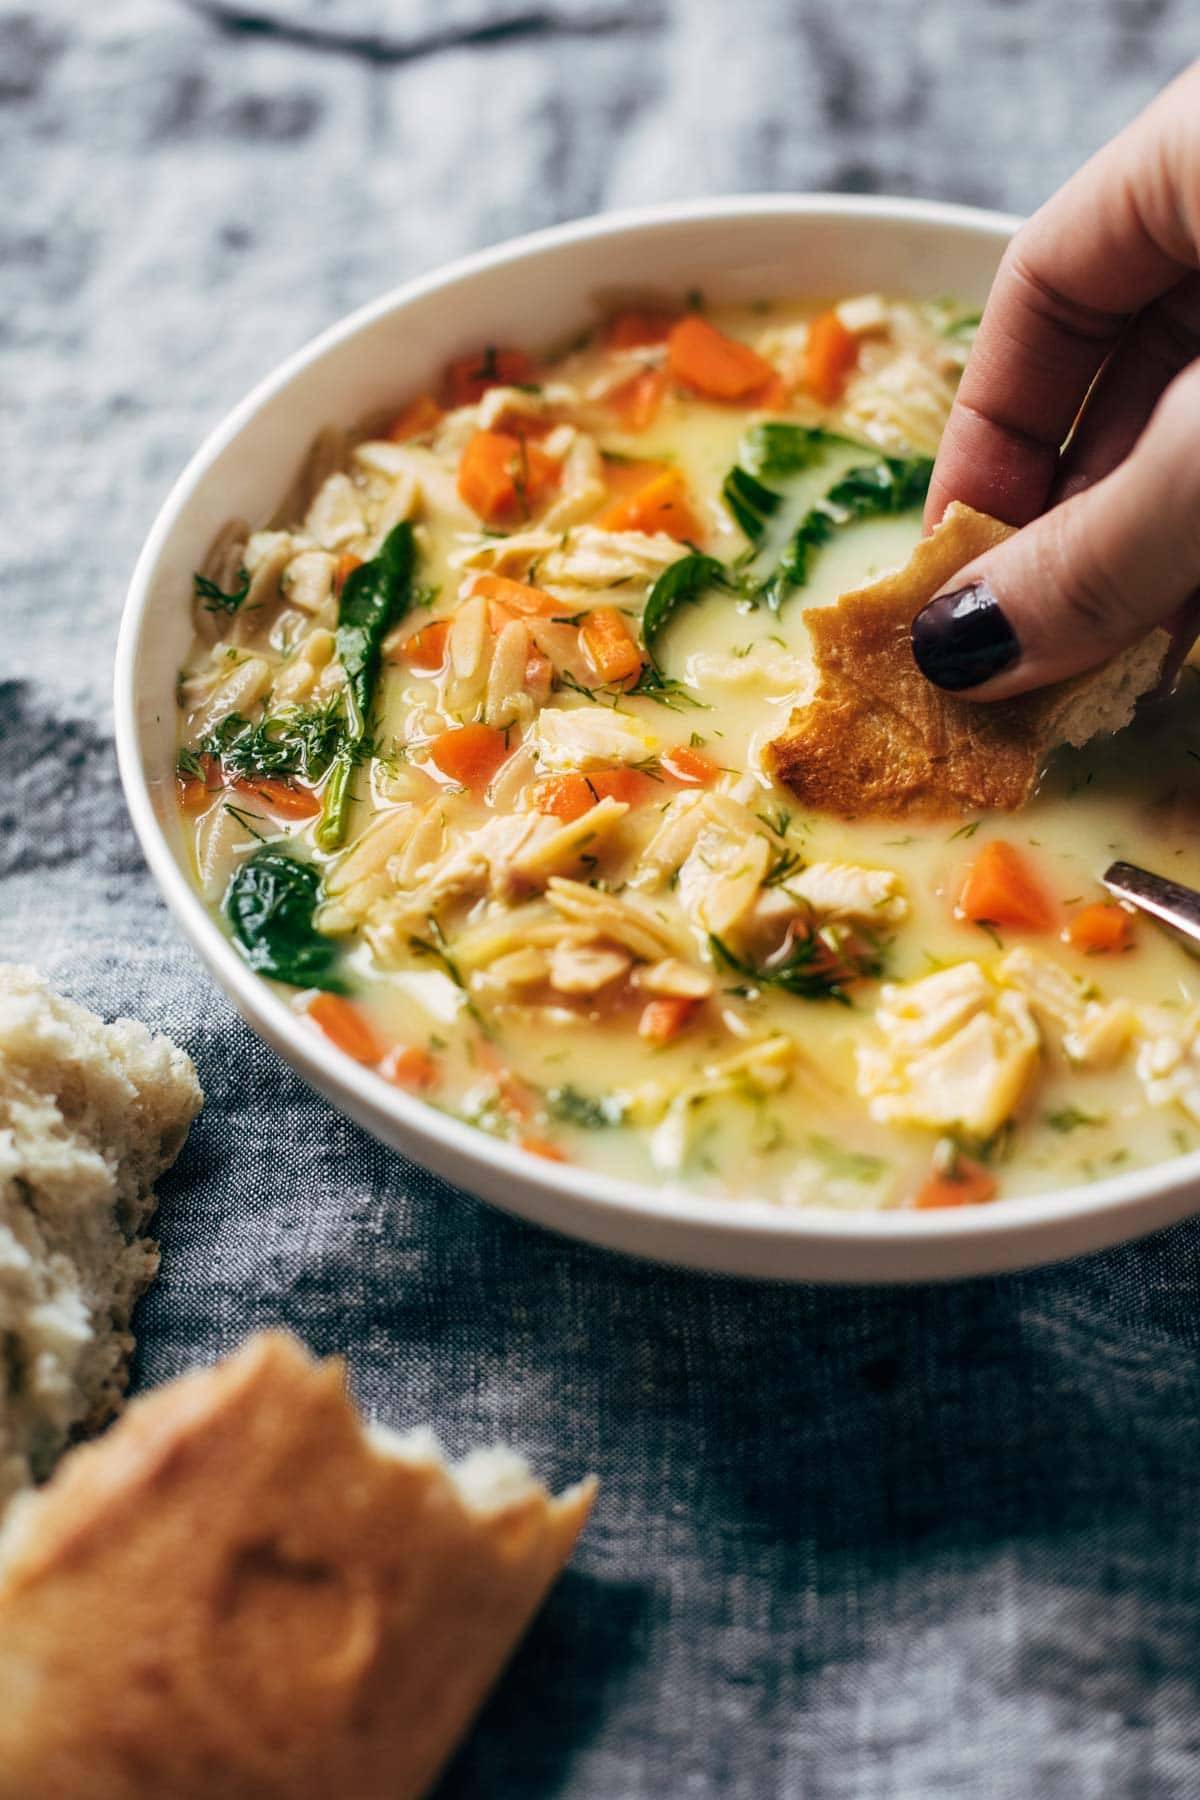 Lemon chicken soup with bread.